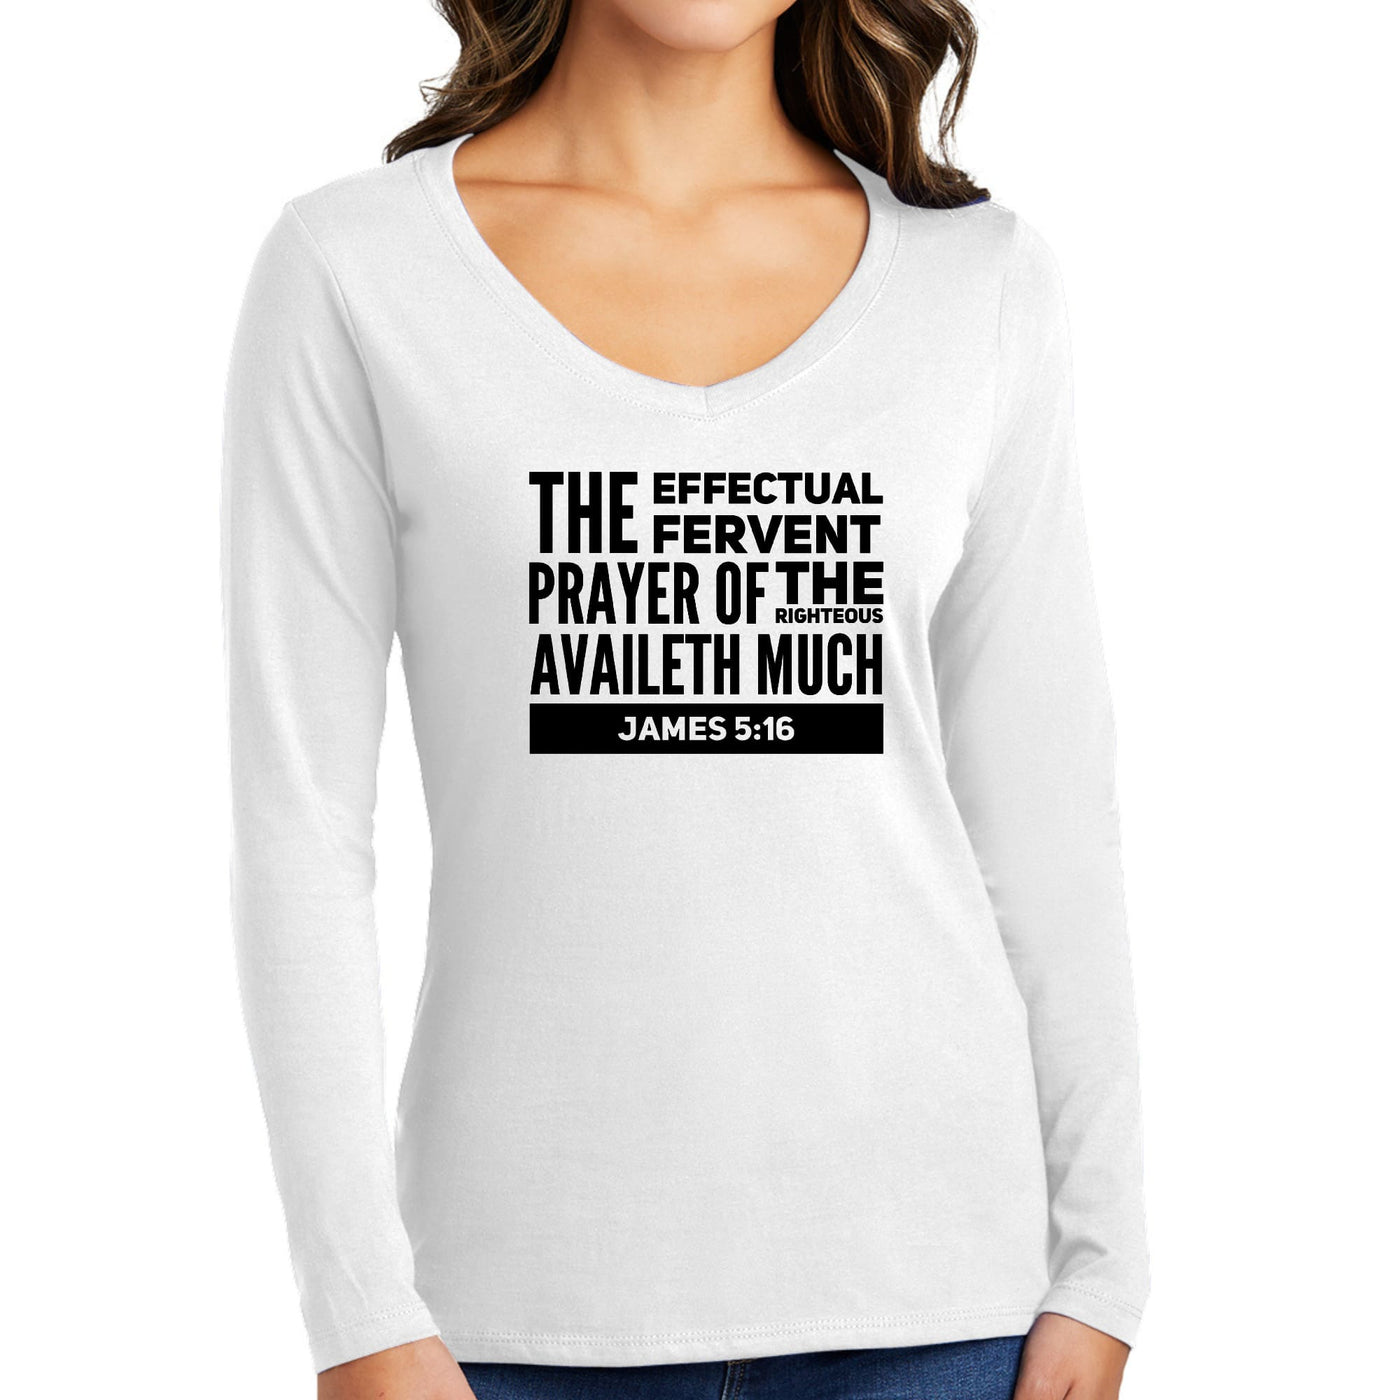 Womens Long Sleeve V - neck Graphic T - shirt The Effectual Fervent - Womens